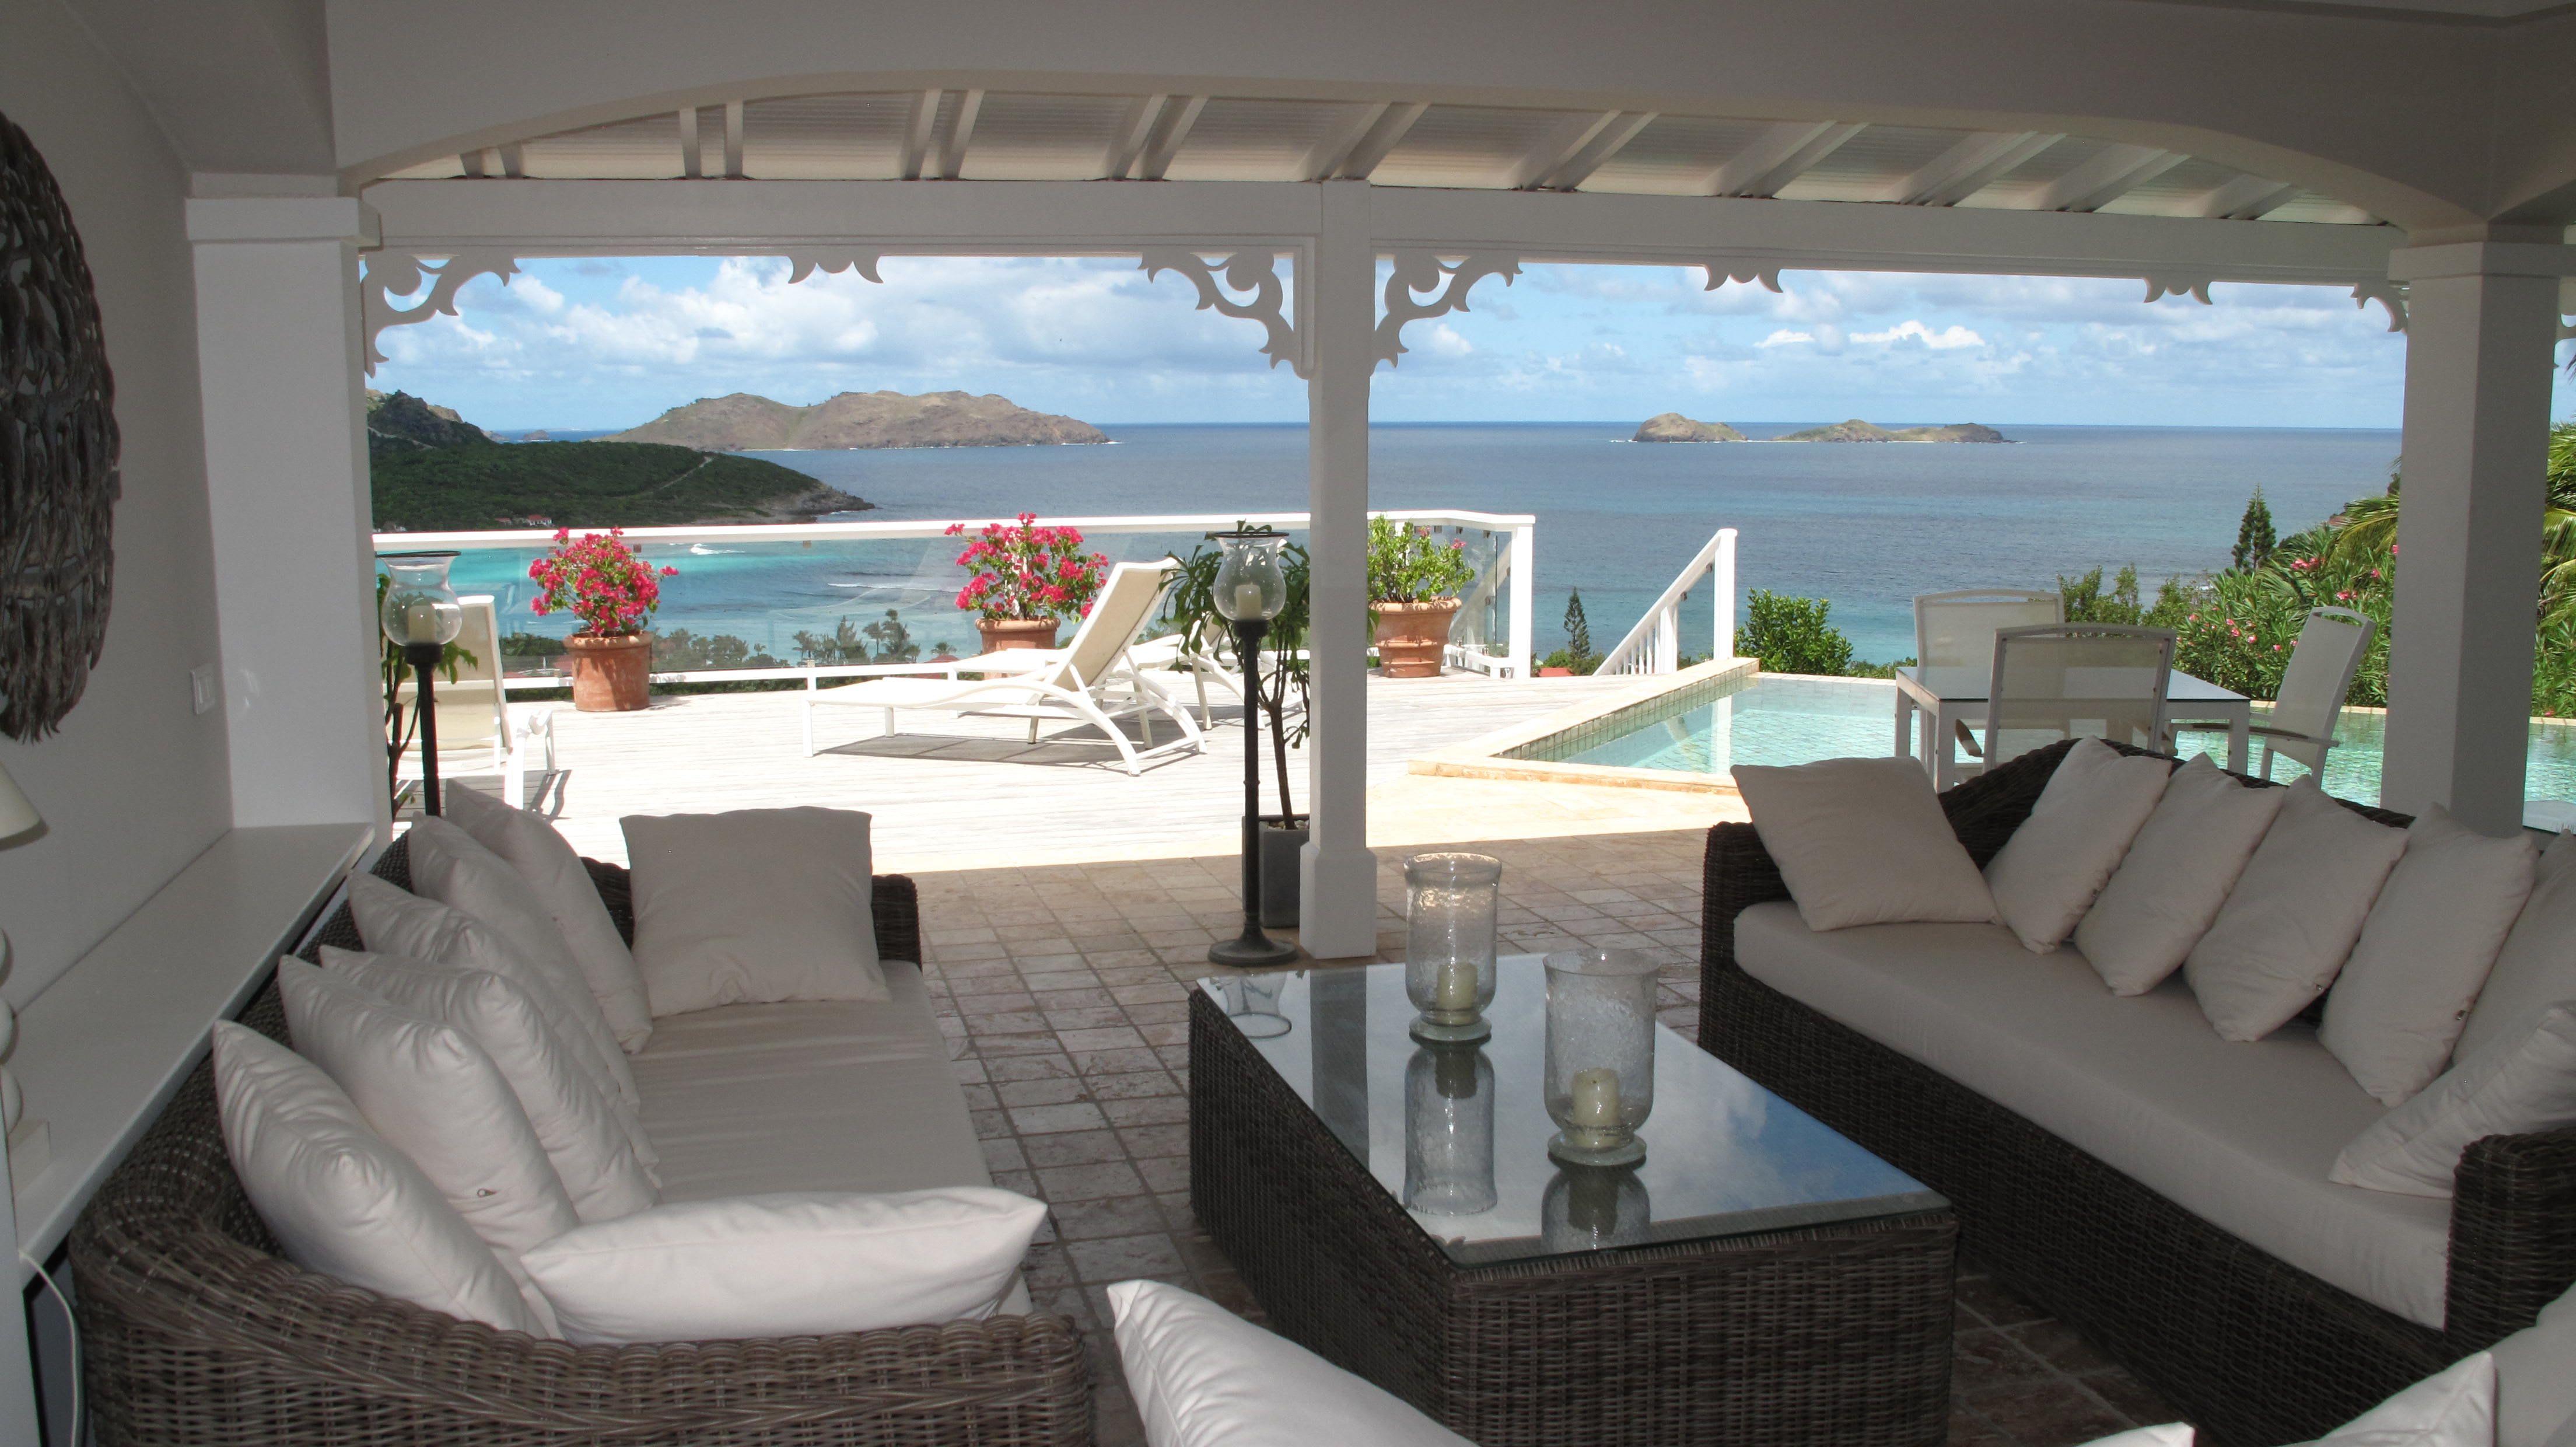 Property Image 2 - Amazing St. Jean’s Villa with Panoramic Ocean Views